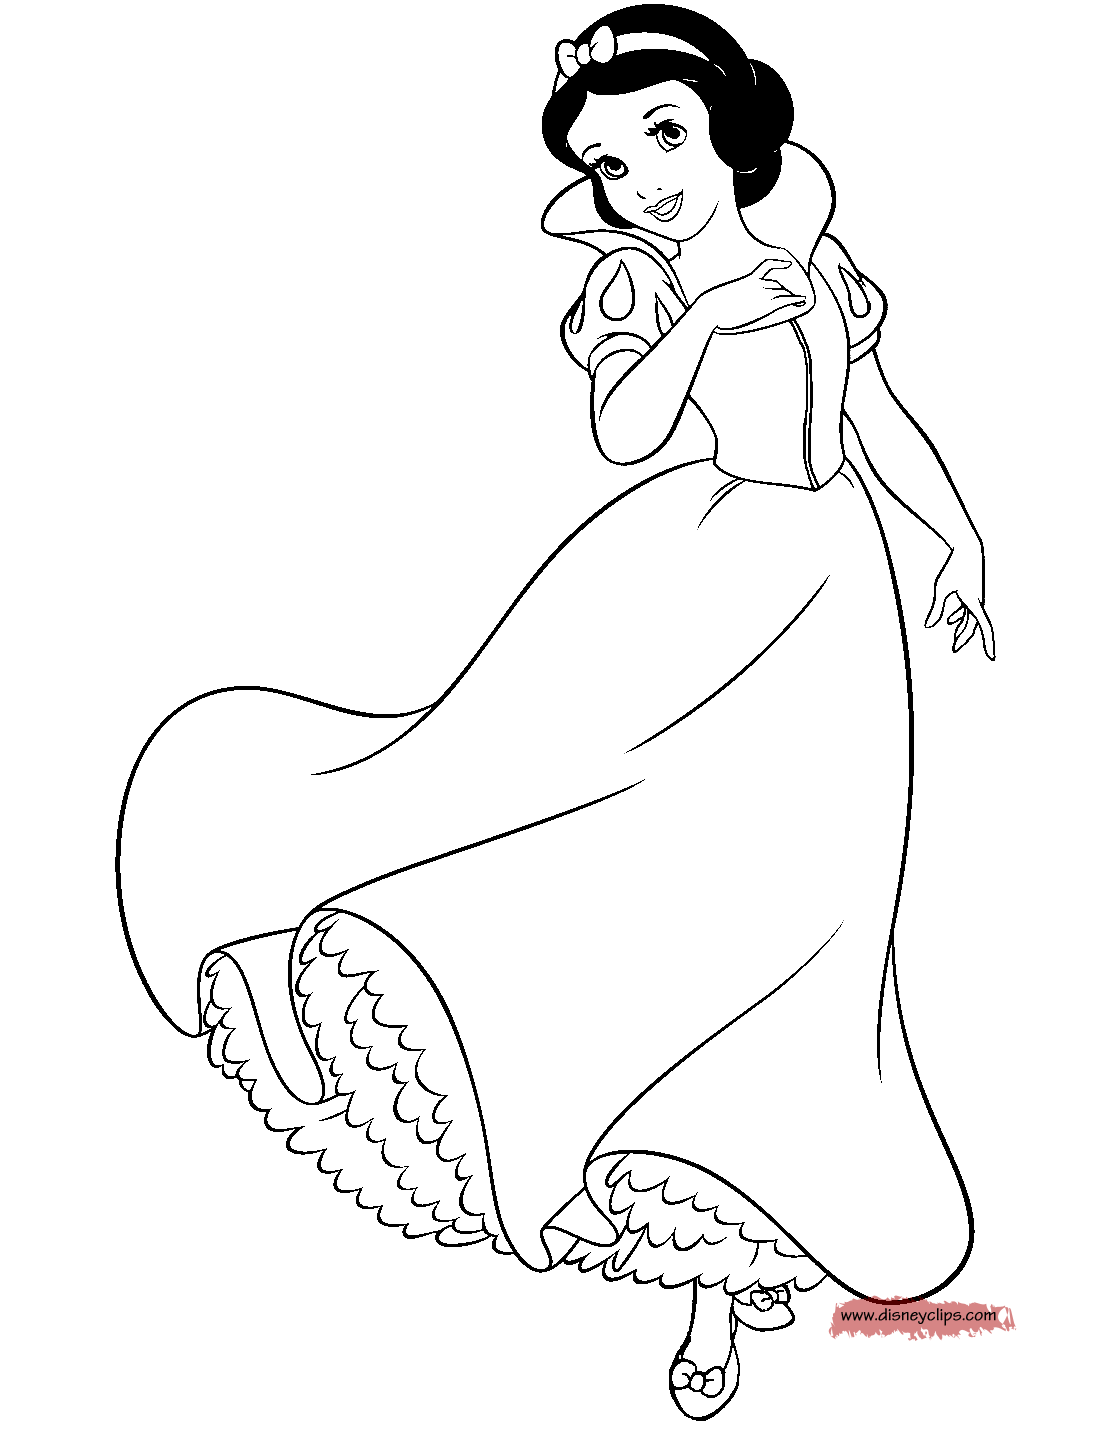 Princess Coloring Sheets on Coloring Pages